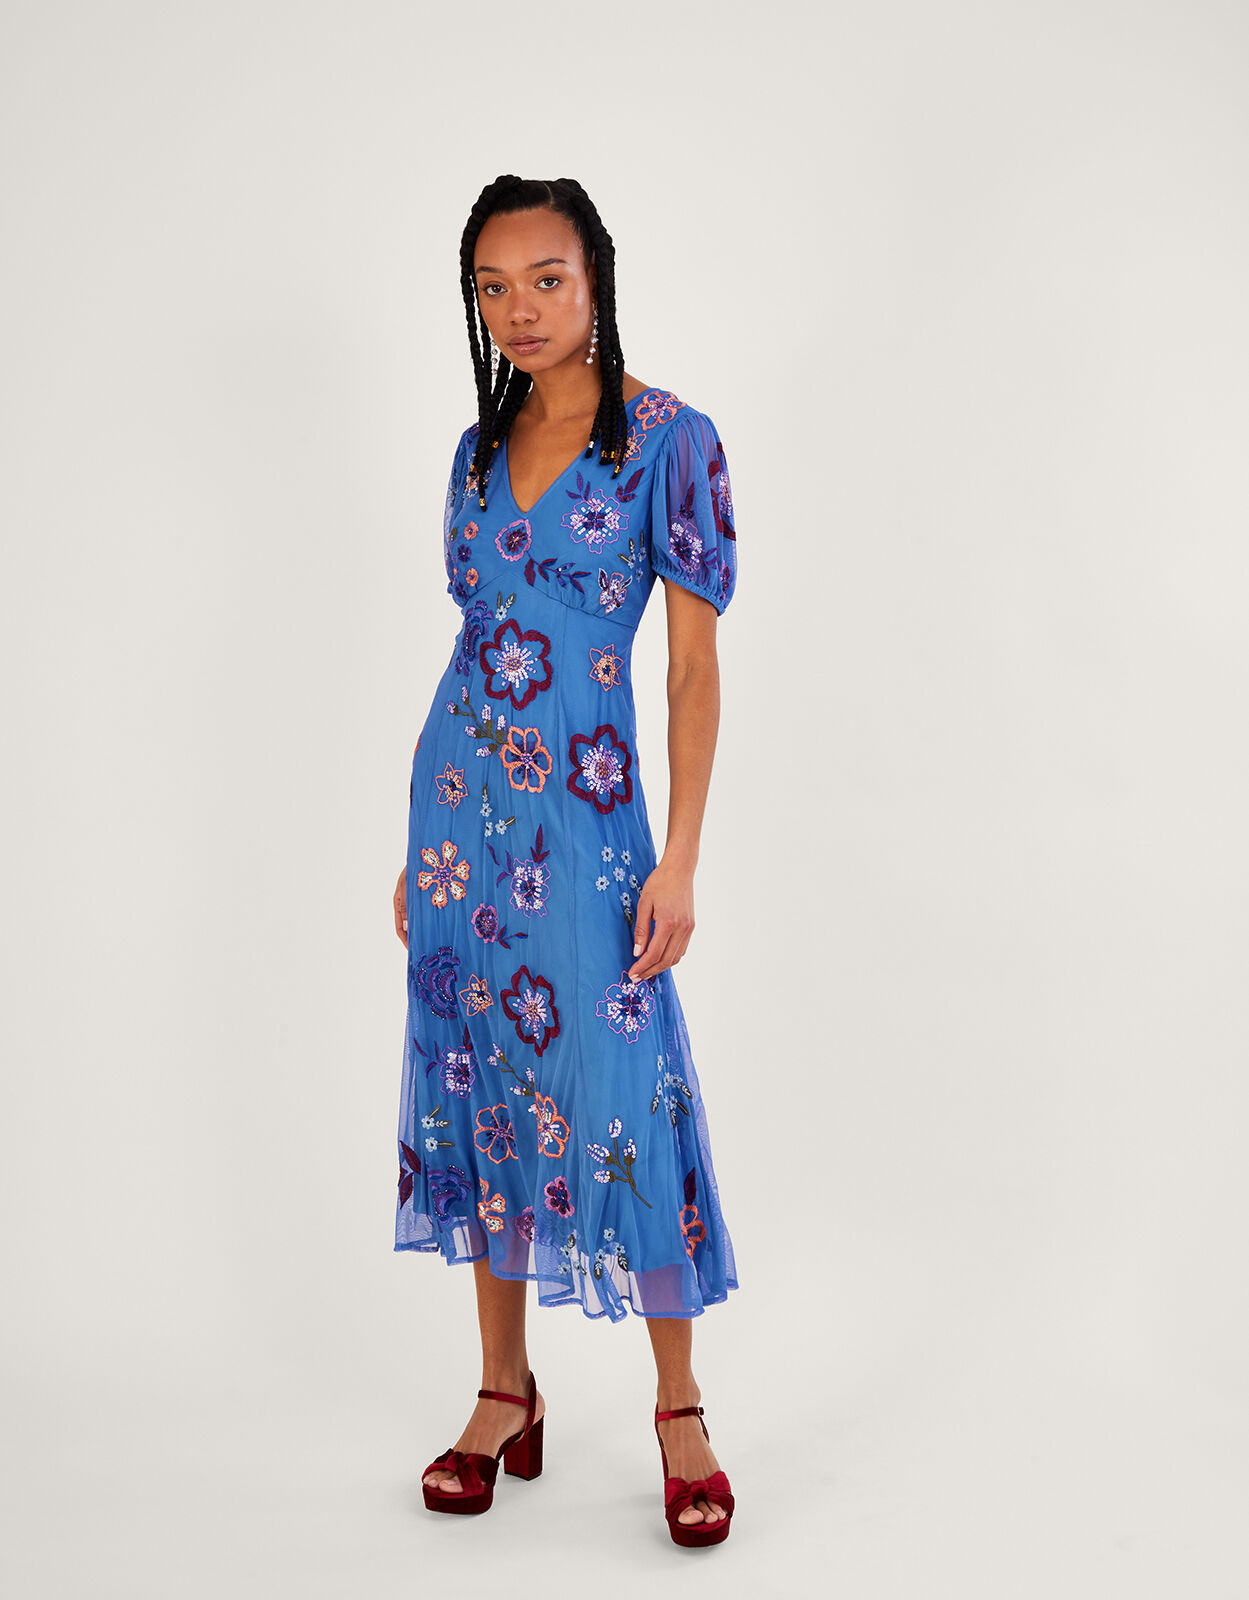 Summer Midi Dresses Are Up to 61% Off at Amazon Over the Fourth of July